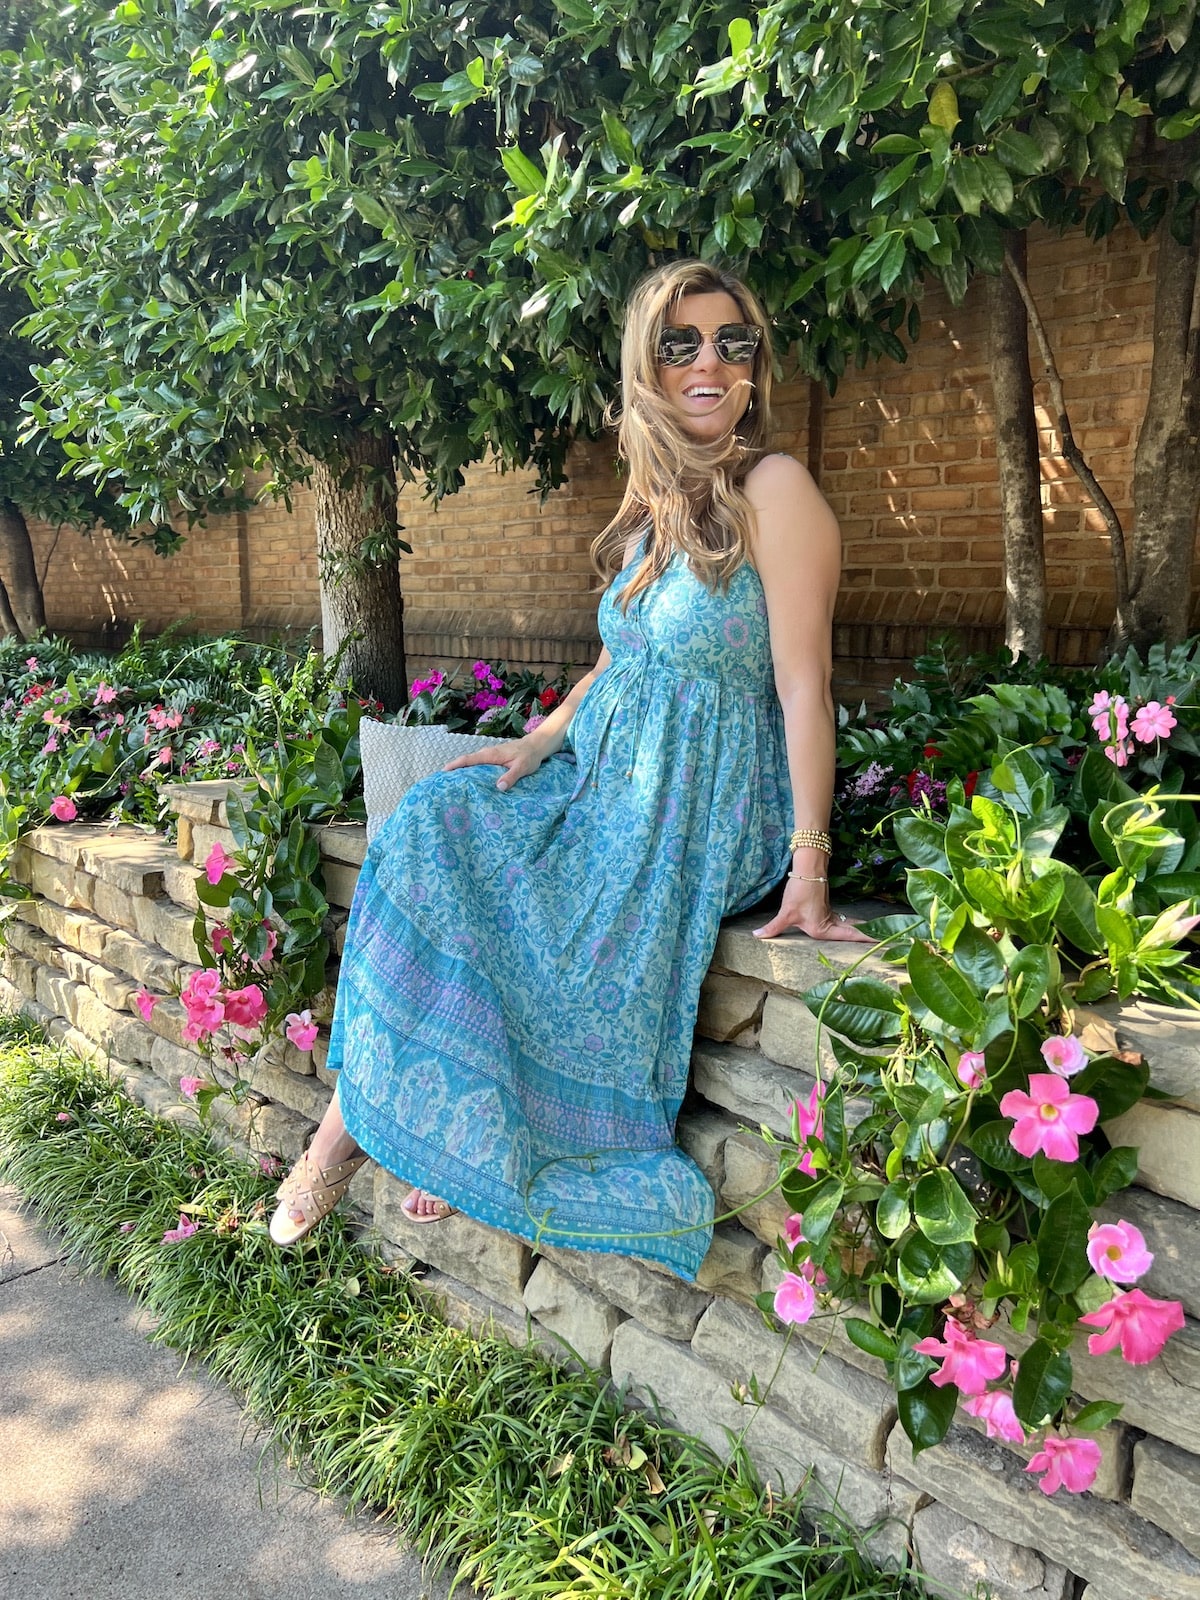 Brighton Butler wearing revolve blue floral dress with blue beach bag